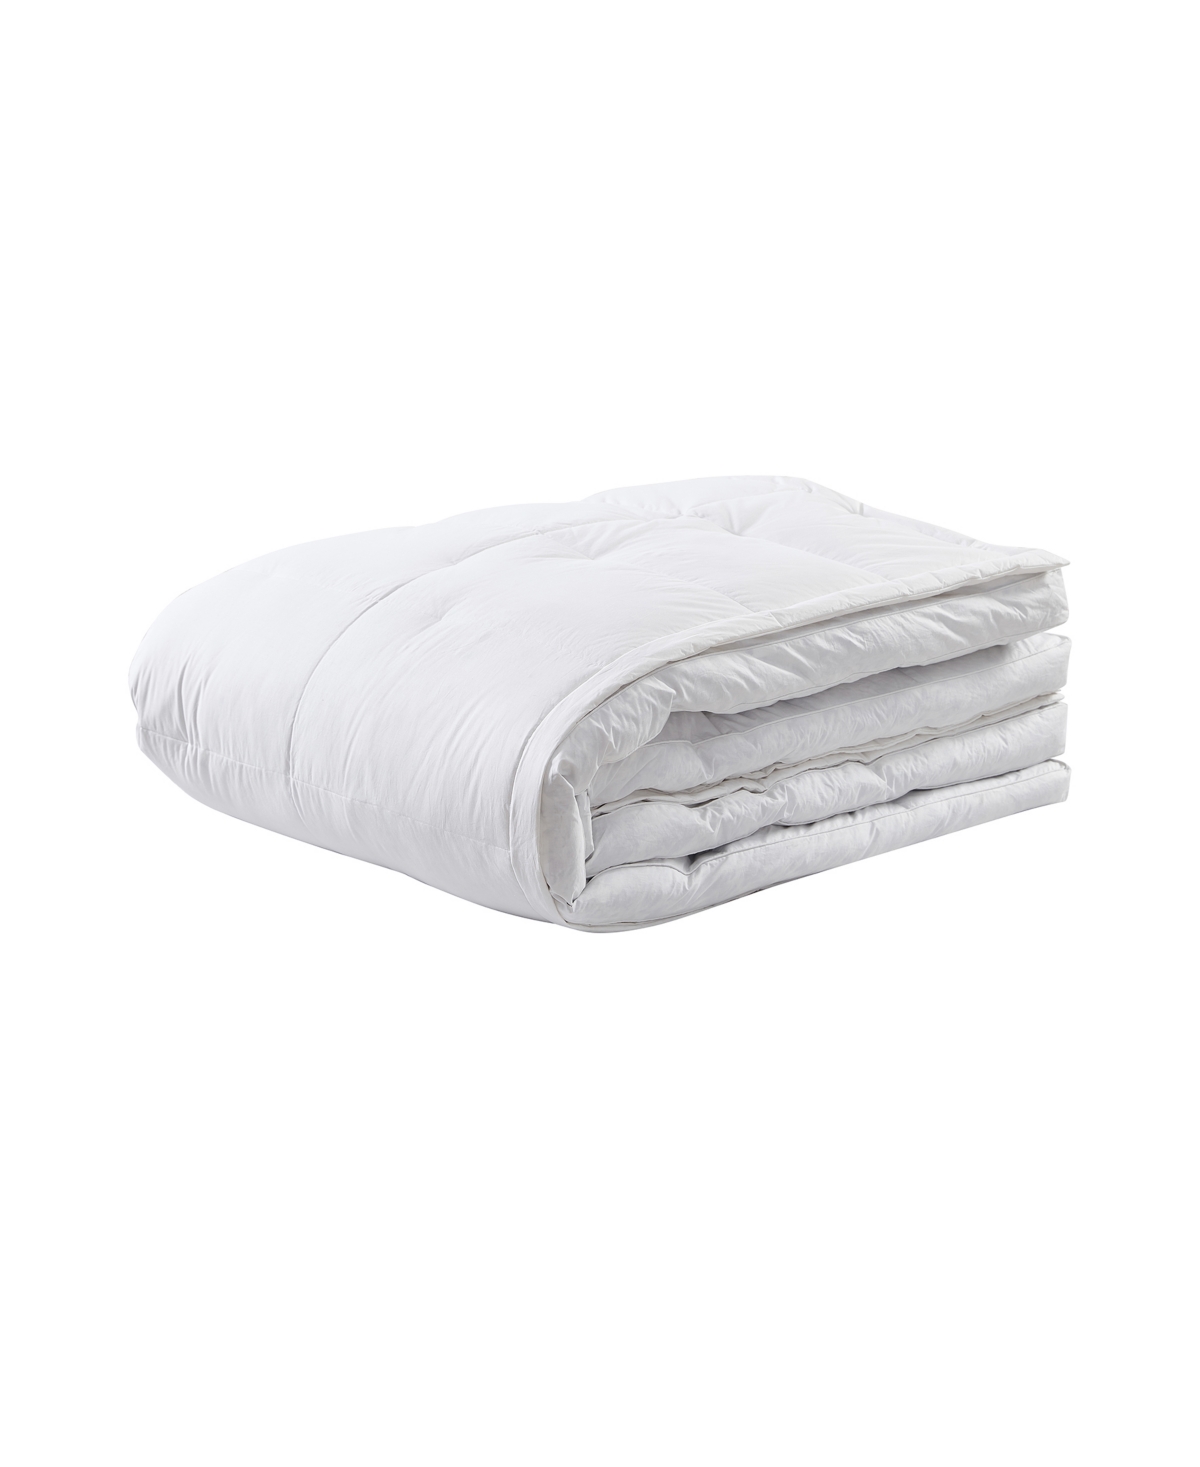 Serta Heiq Cooling 3" White Downtop Featherbed, Full